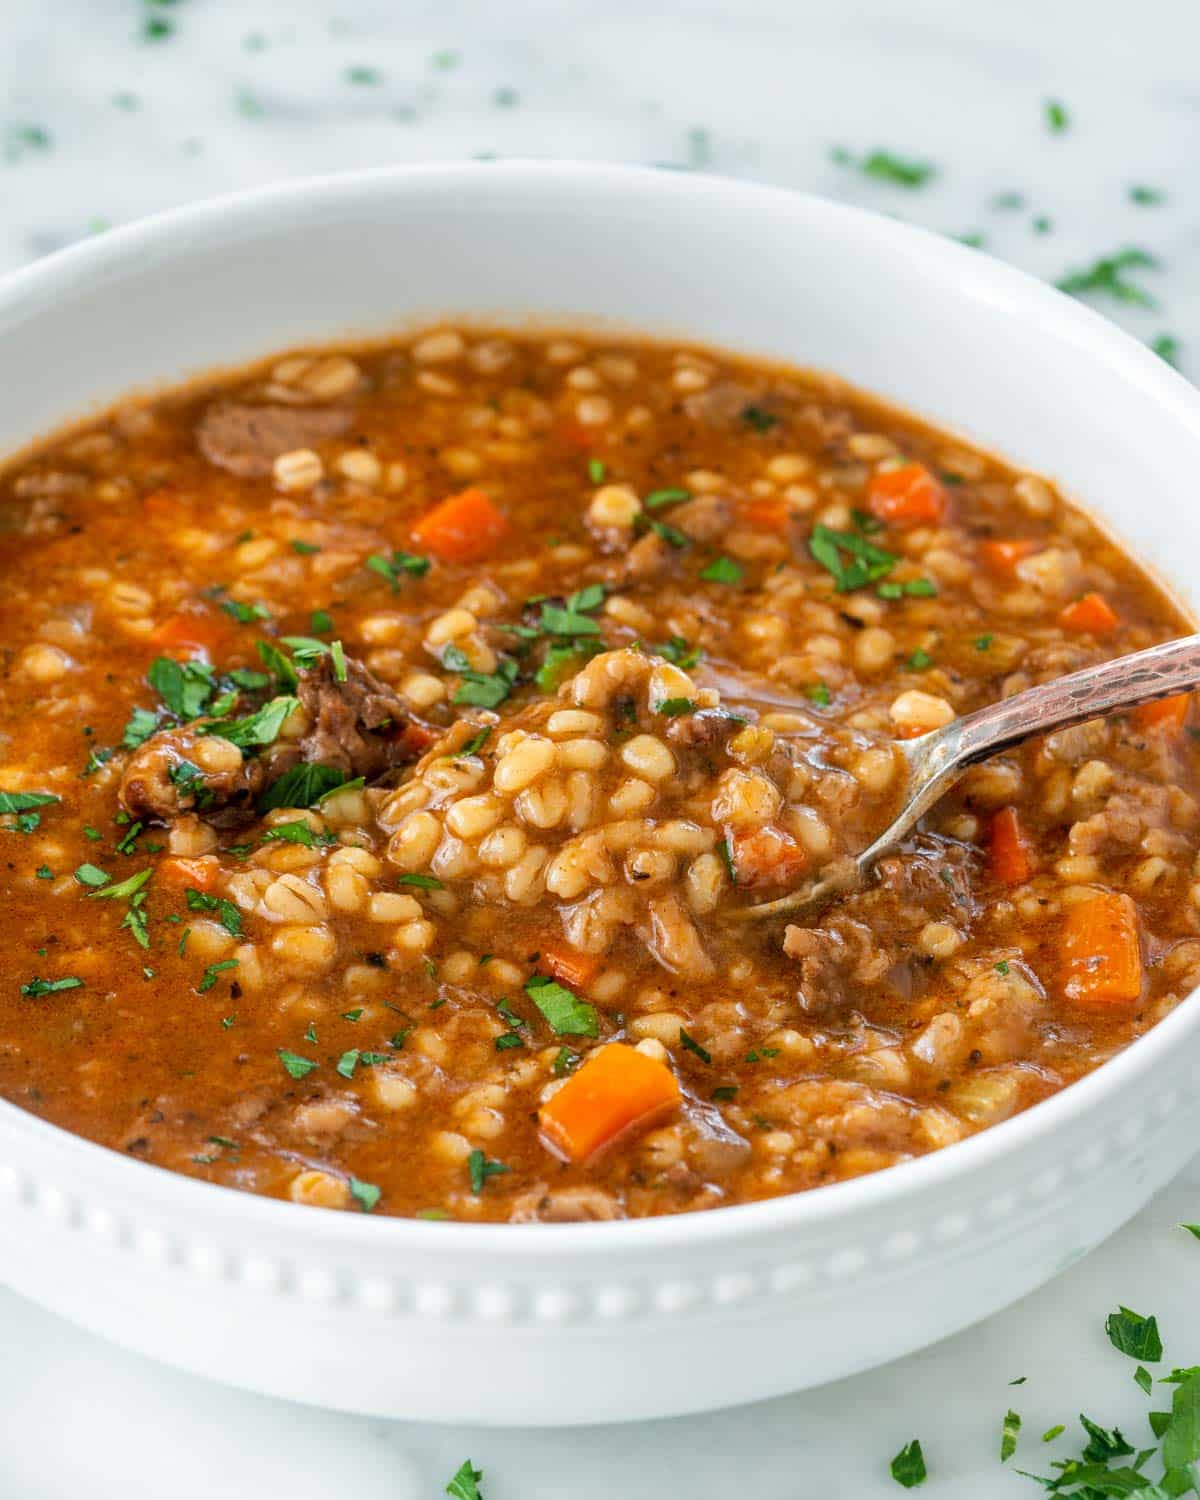 h*t I Bake: Lentil Soup made with Homemade Lamb Stock